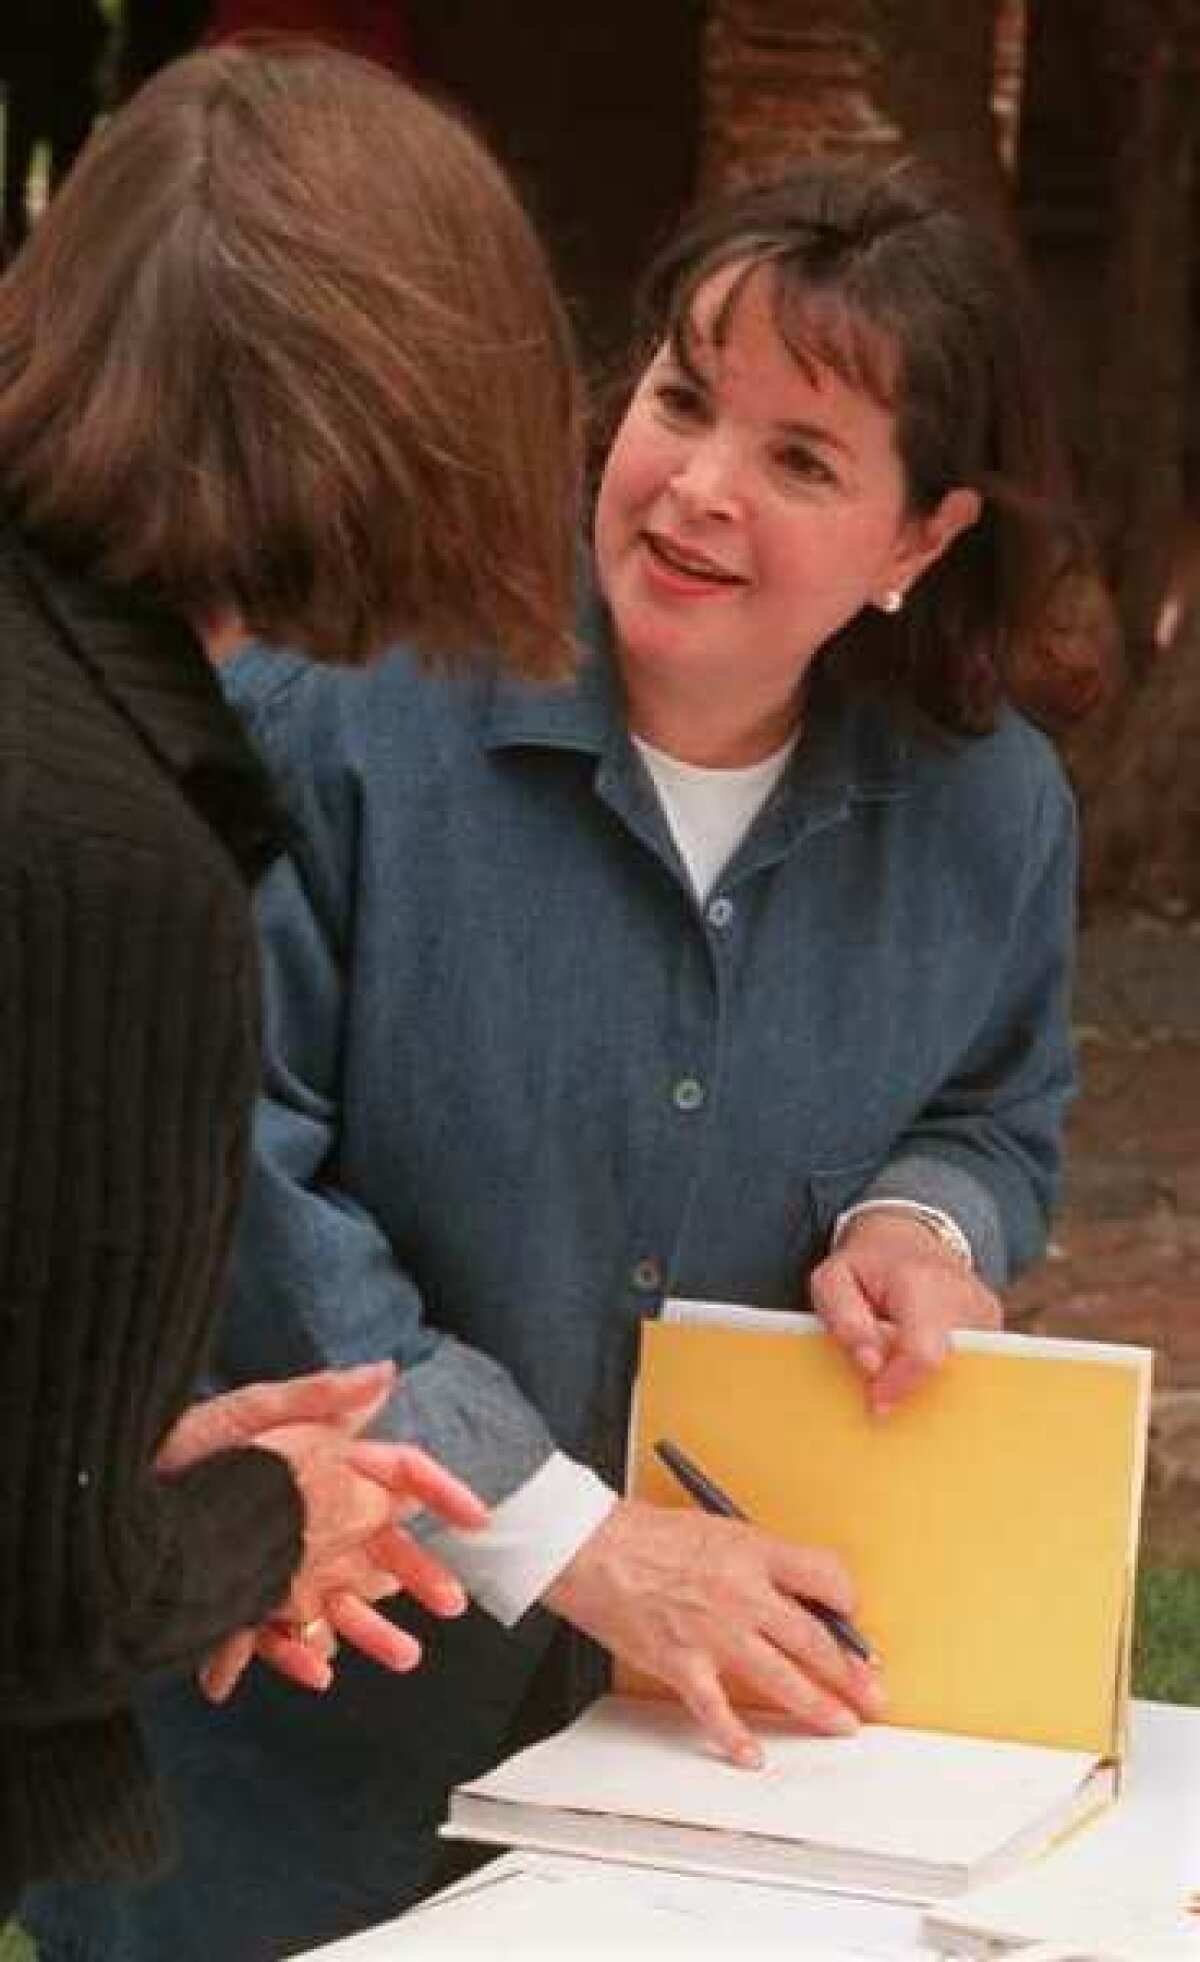 Ina Garten, star of TV's "The Barefoot Contessa," signs one of her cookbooks for a fan.